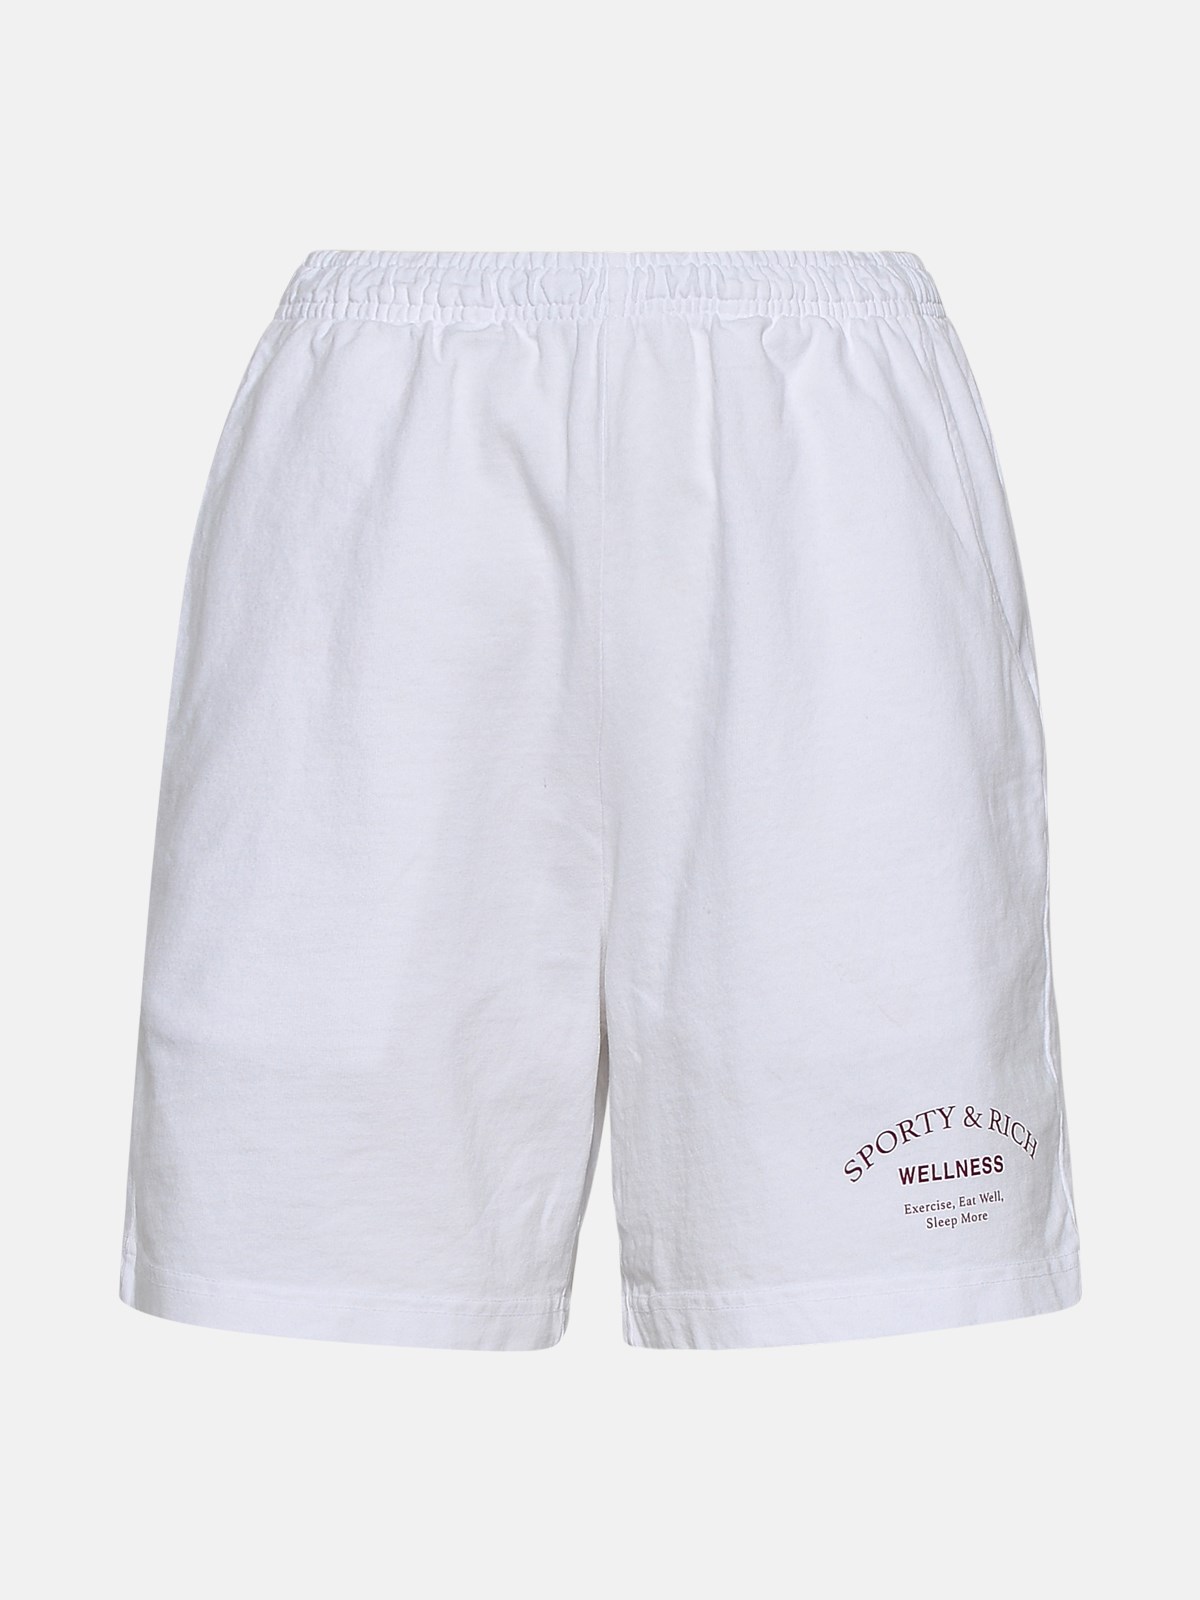 Sporty And Rich White Cotton Shorts